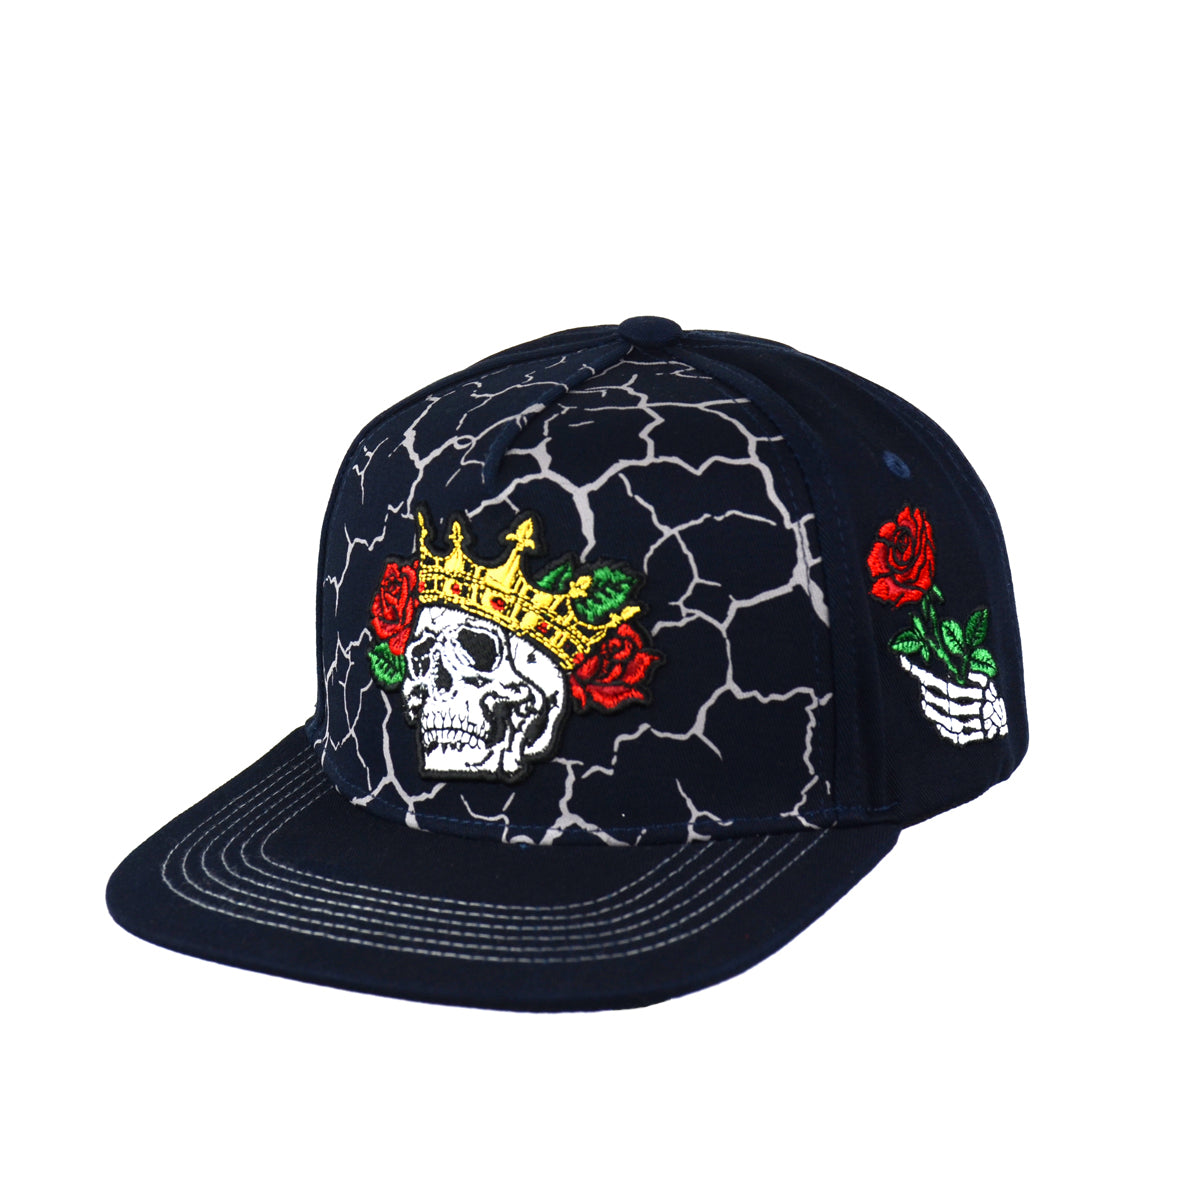 Snapback Hats Dead King Embroidered